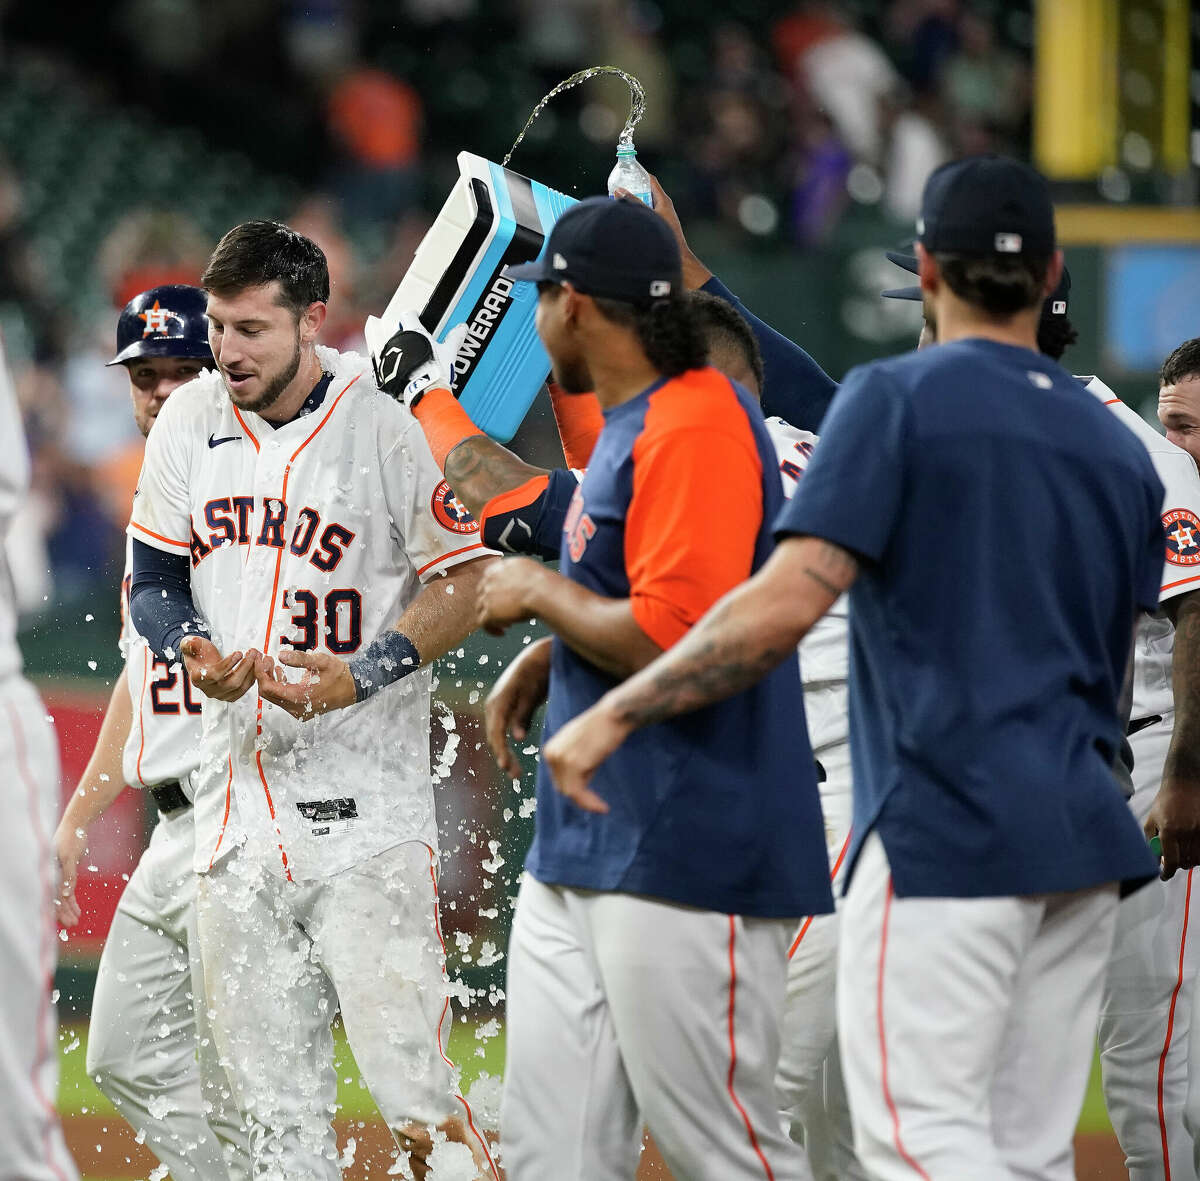 Houston Astros Kyle Tucker (30) gets an ice bath from teammates after he hit an RBI single which scored the game wining run during the ninth inning of an MLB baseball game at Minute Maid Park on Thursday, May 5, 2022 in Houston.